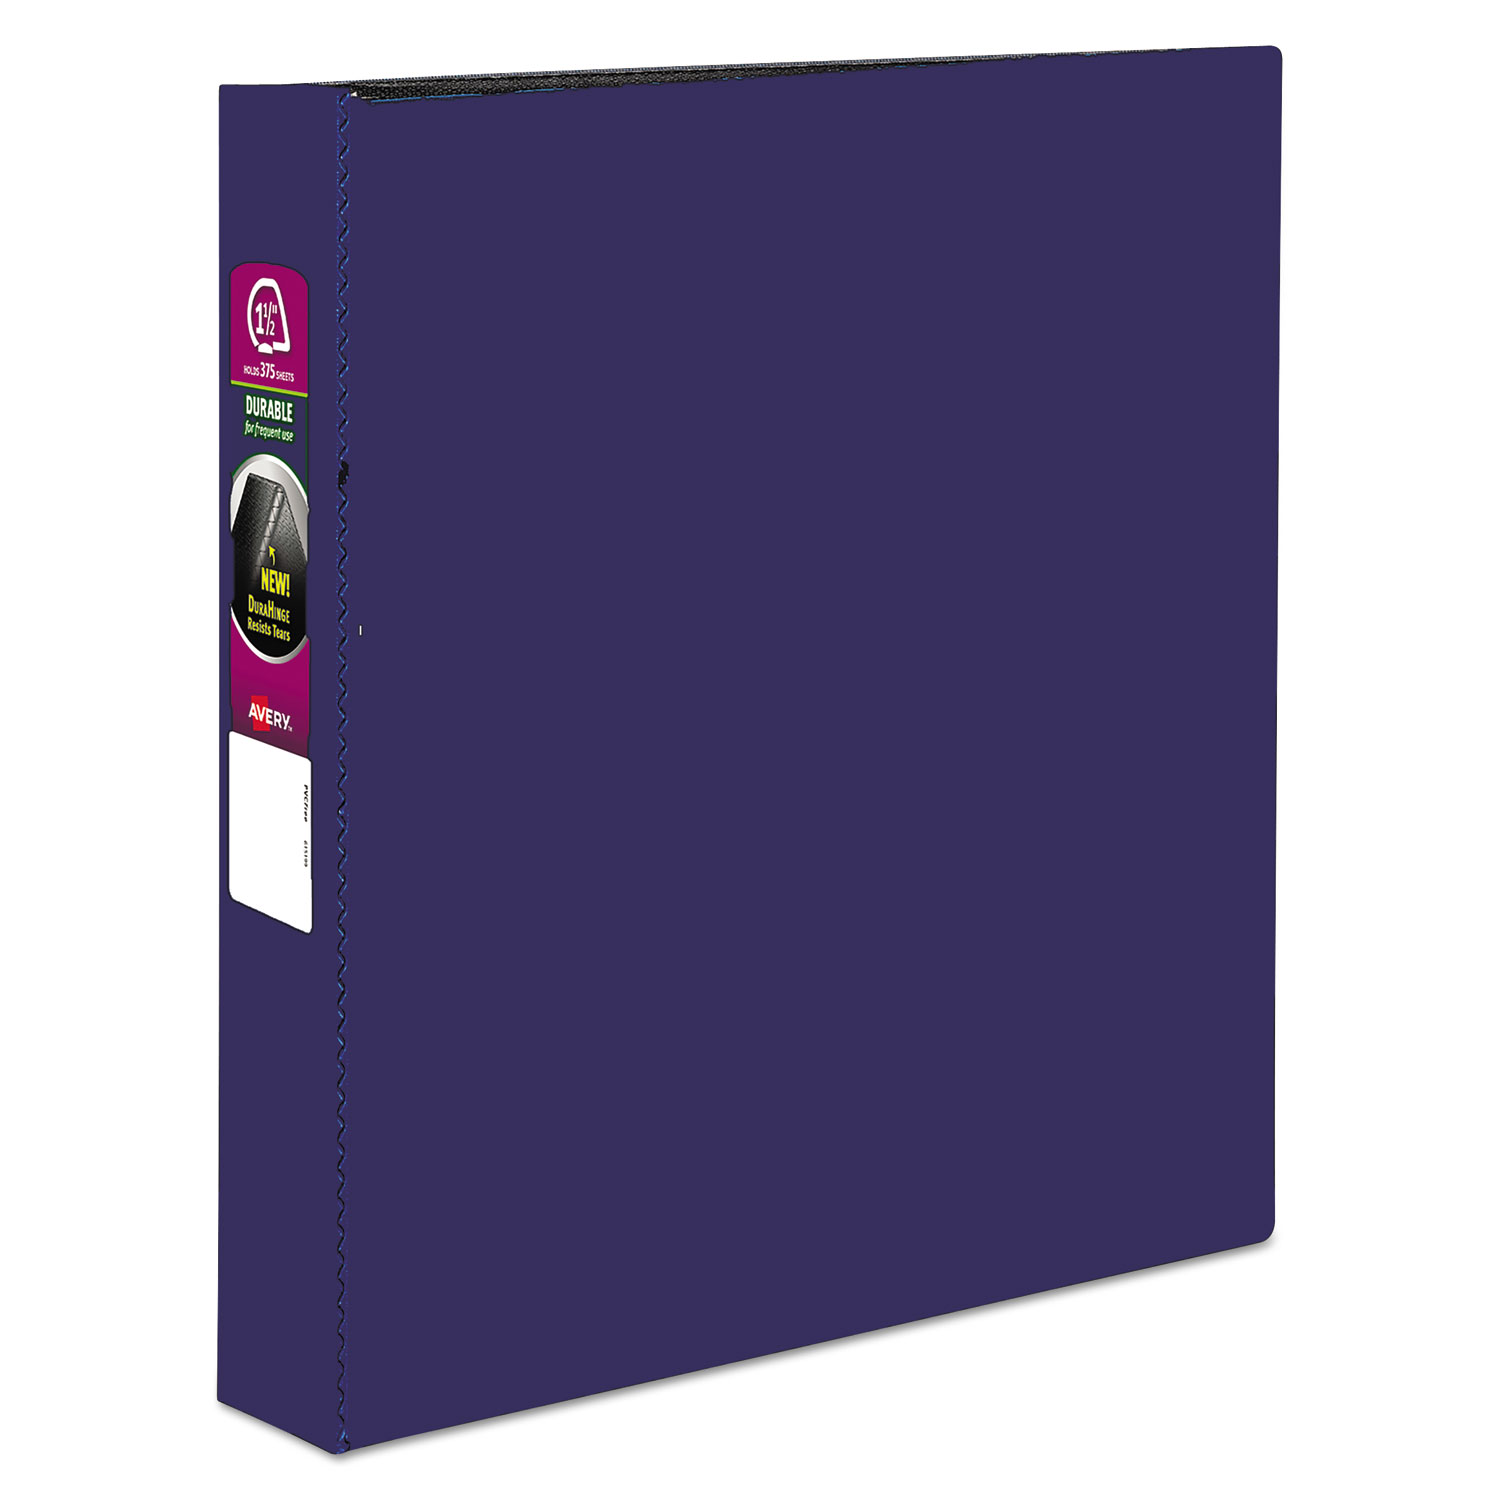  Avery 27351 Durable Non-View Binder with DuraHinge and Slant Rings, 3 Rings, 1.5 Capacity, 11 x 8.5, Blue (AVE27351) 